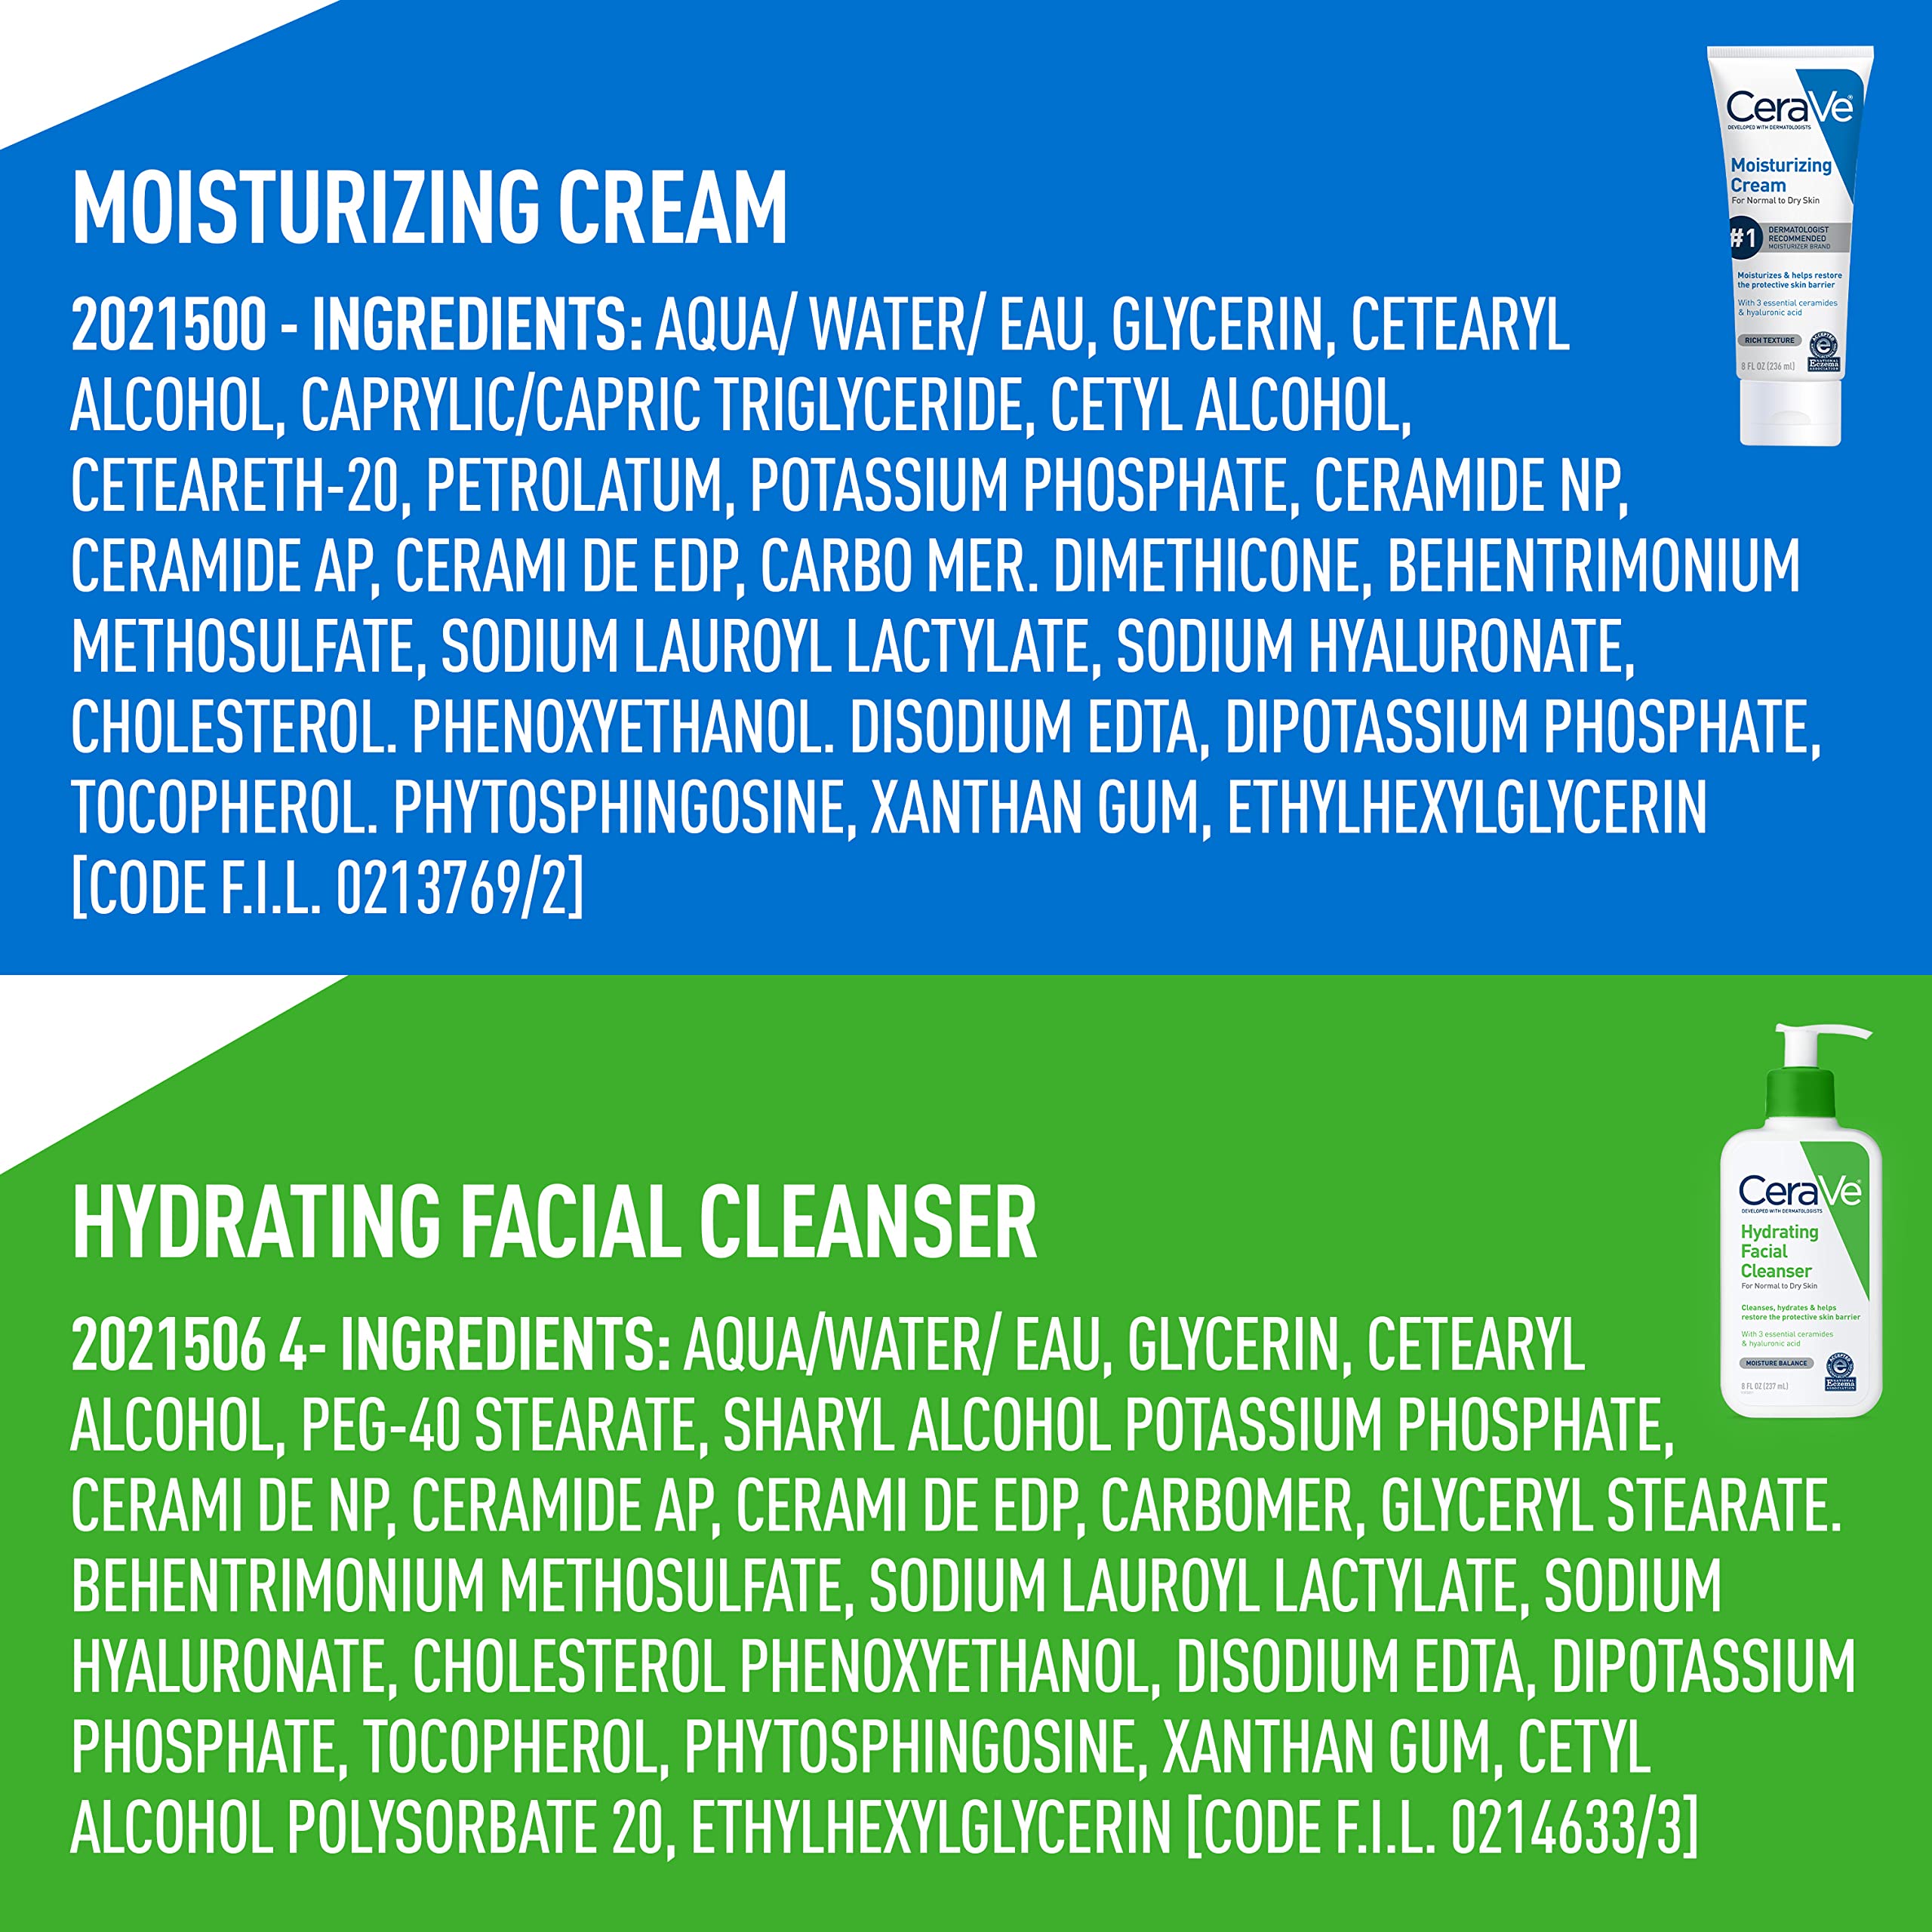 CeraVe Moisturizing Cream and Hydrating Skin Care Set for Dry Skin | Face & Body Cream and Non-Foaming Face Wash | Hyaluronic Acid and Ceramides | 8oz Cream + 8oz Cleanser